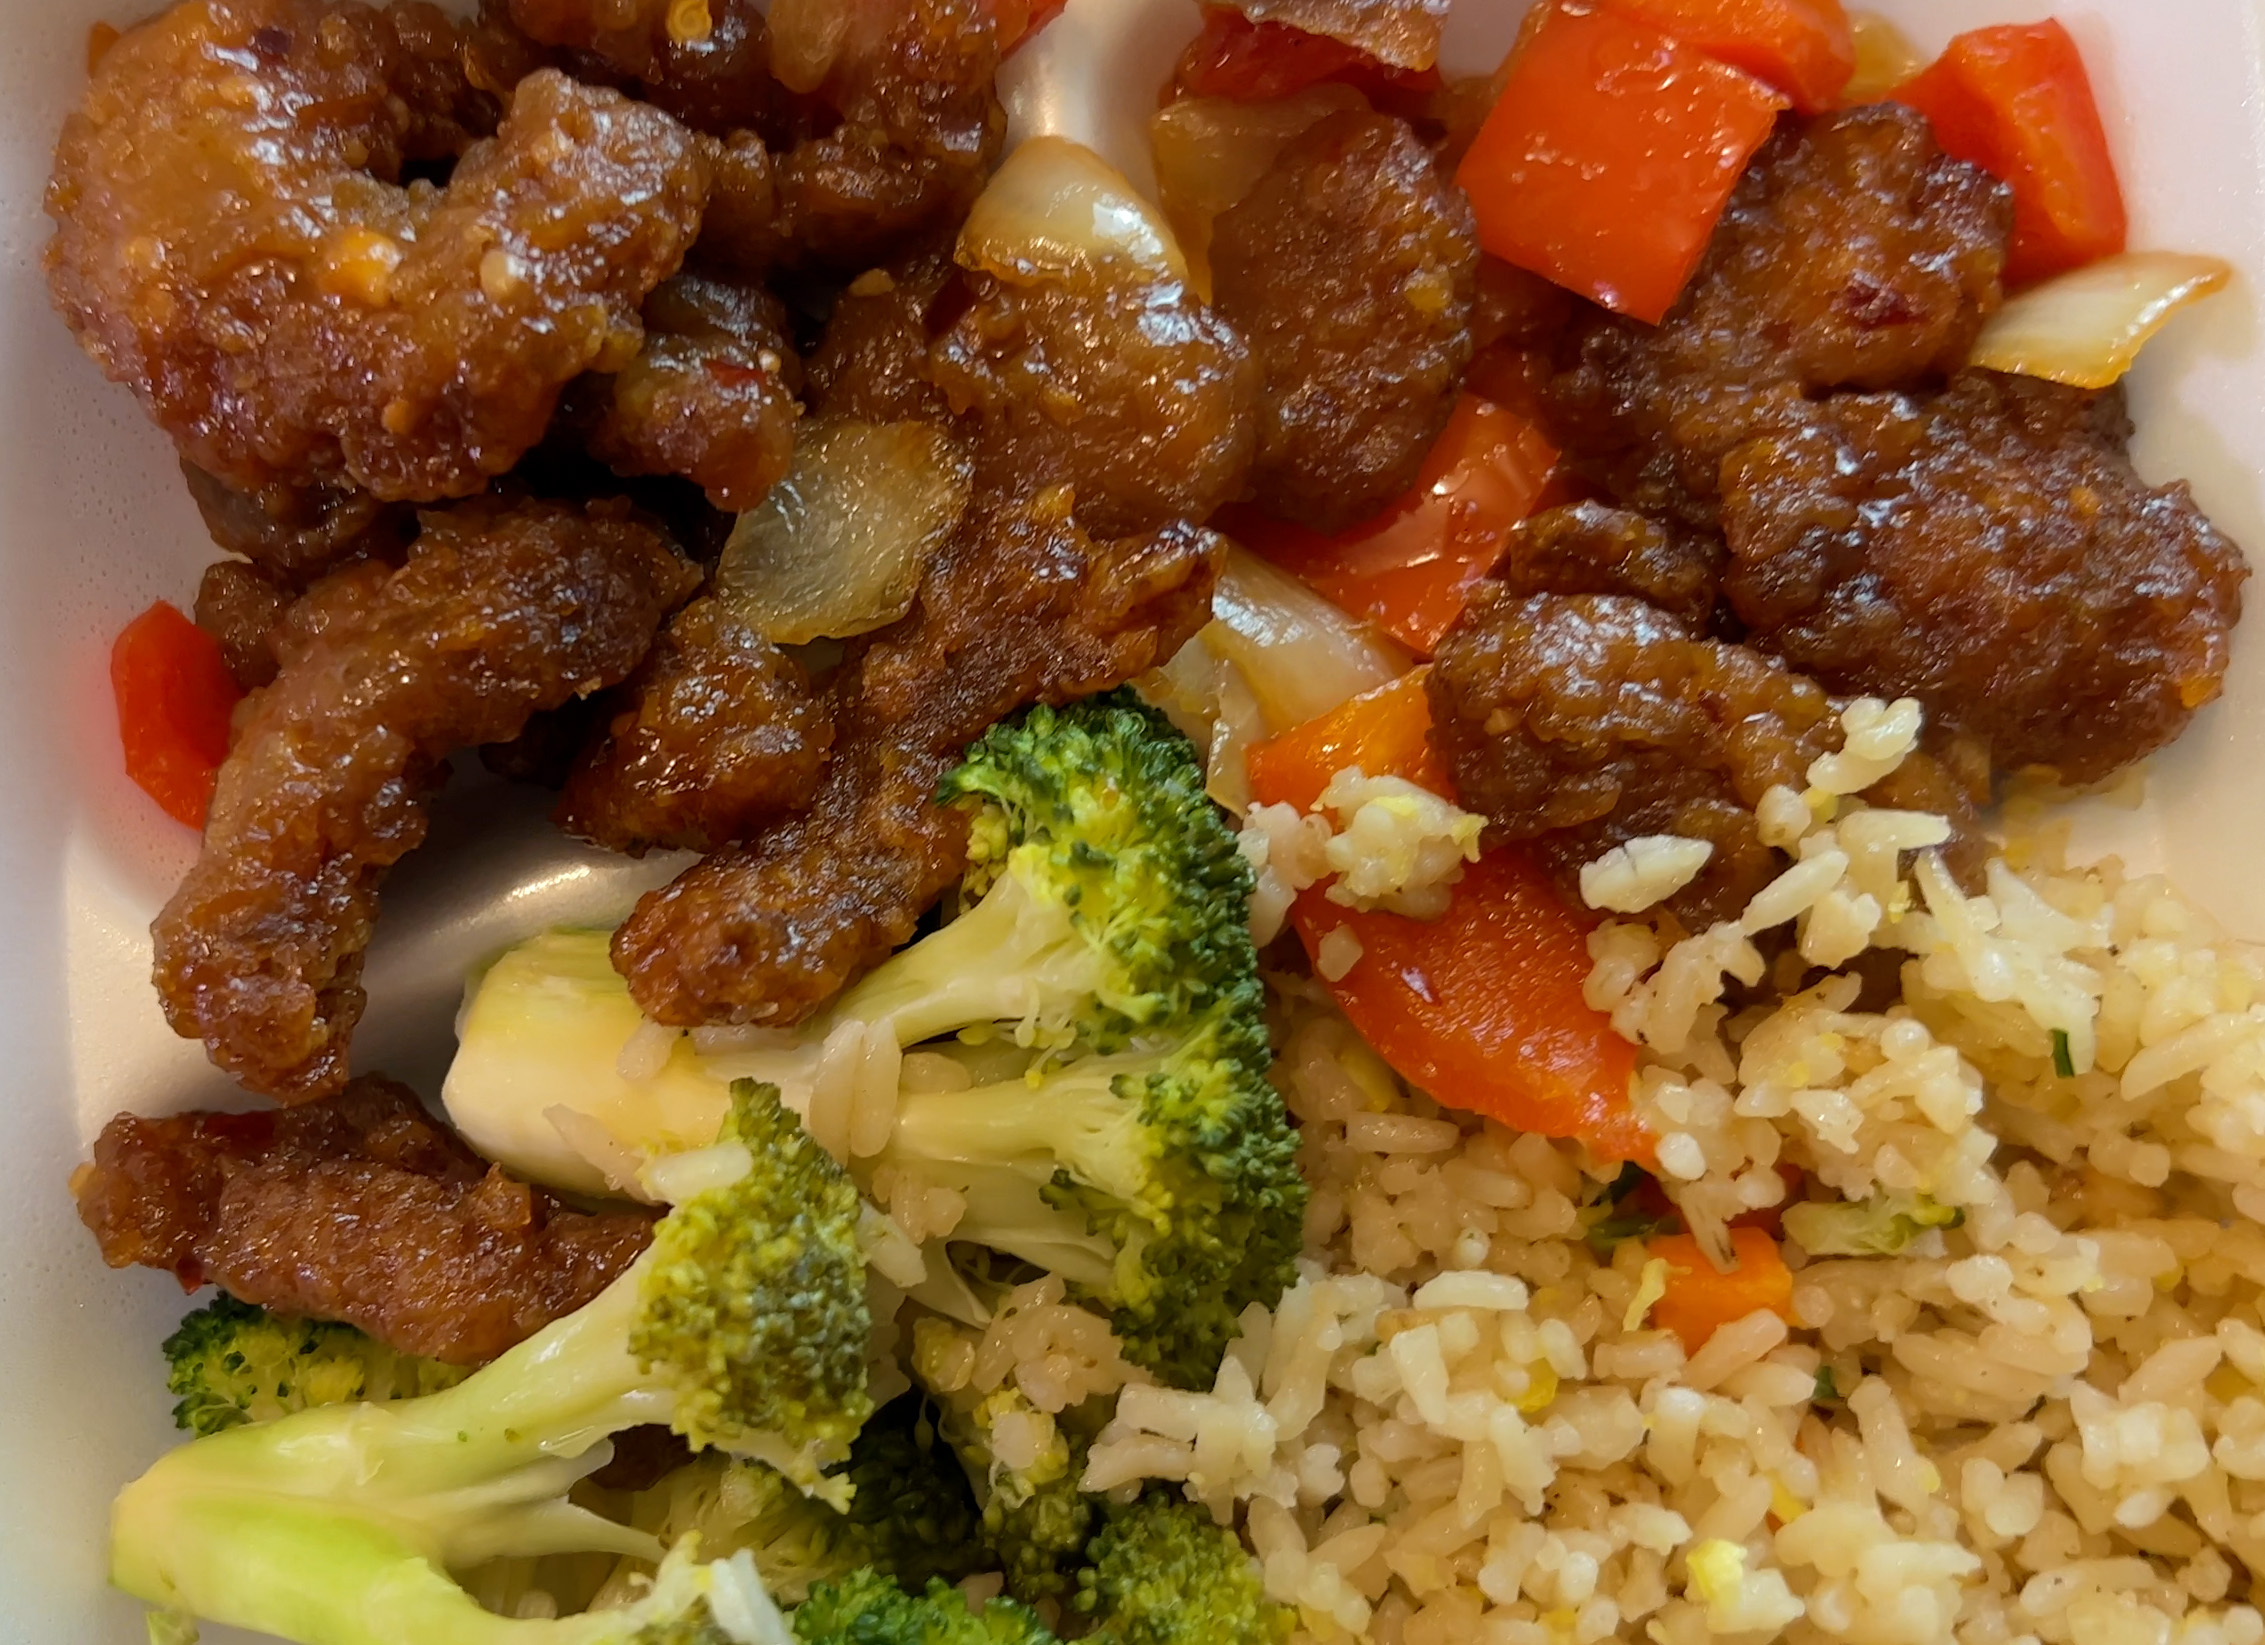 Beijing Beef by Panda Express, Super Greens, and Fried Rice